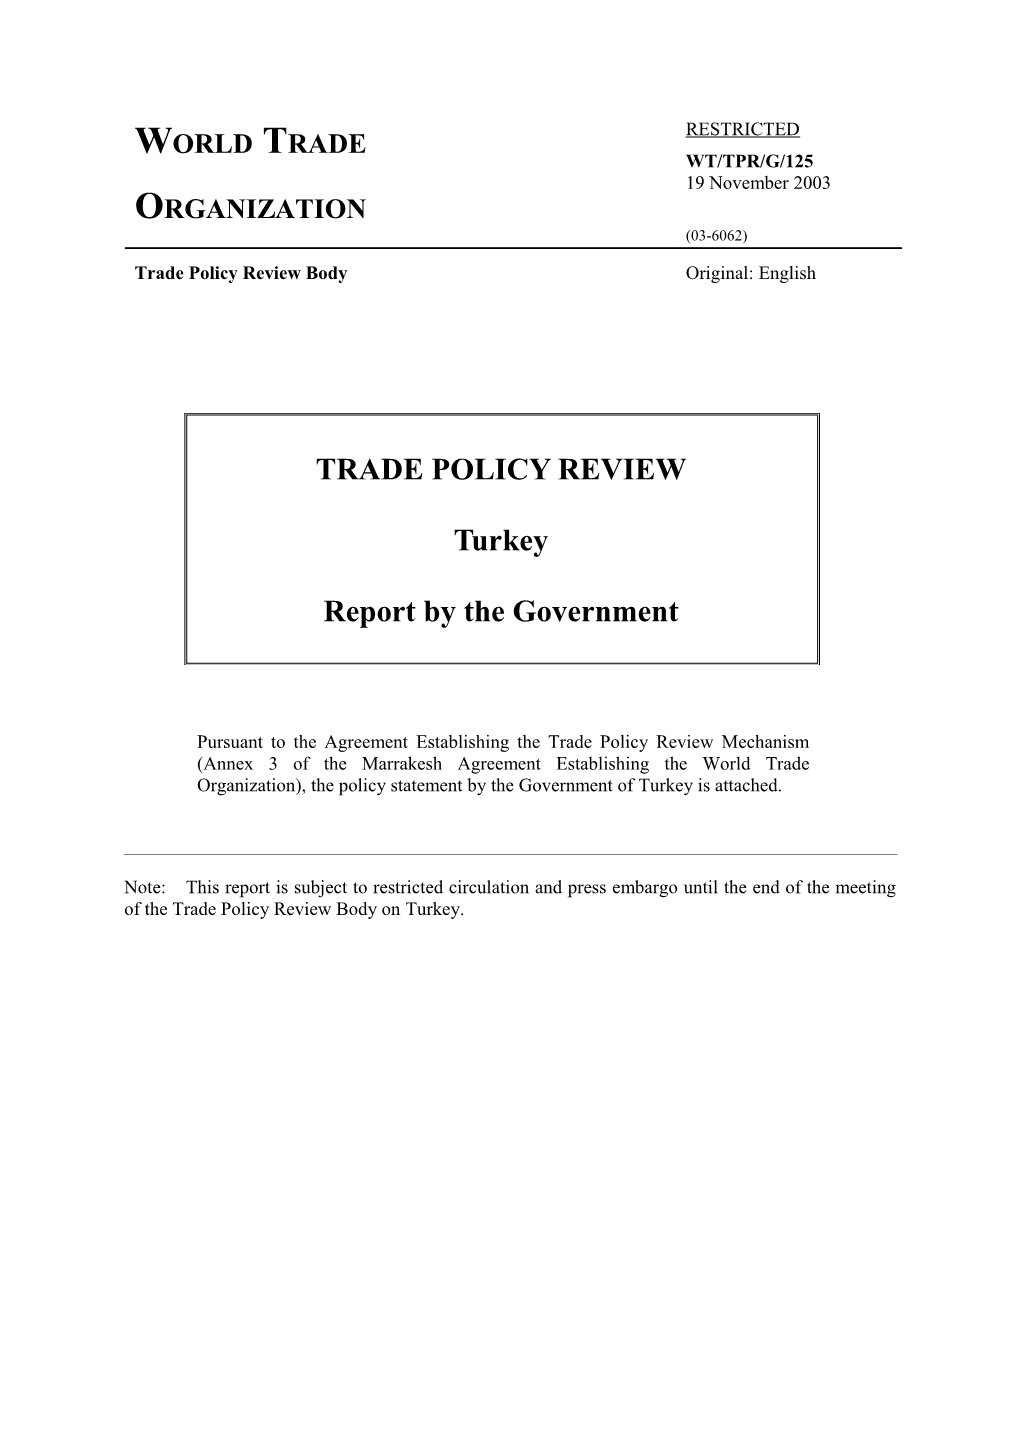 (3)Improvement of the Investment Environment in Turkey9